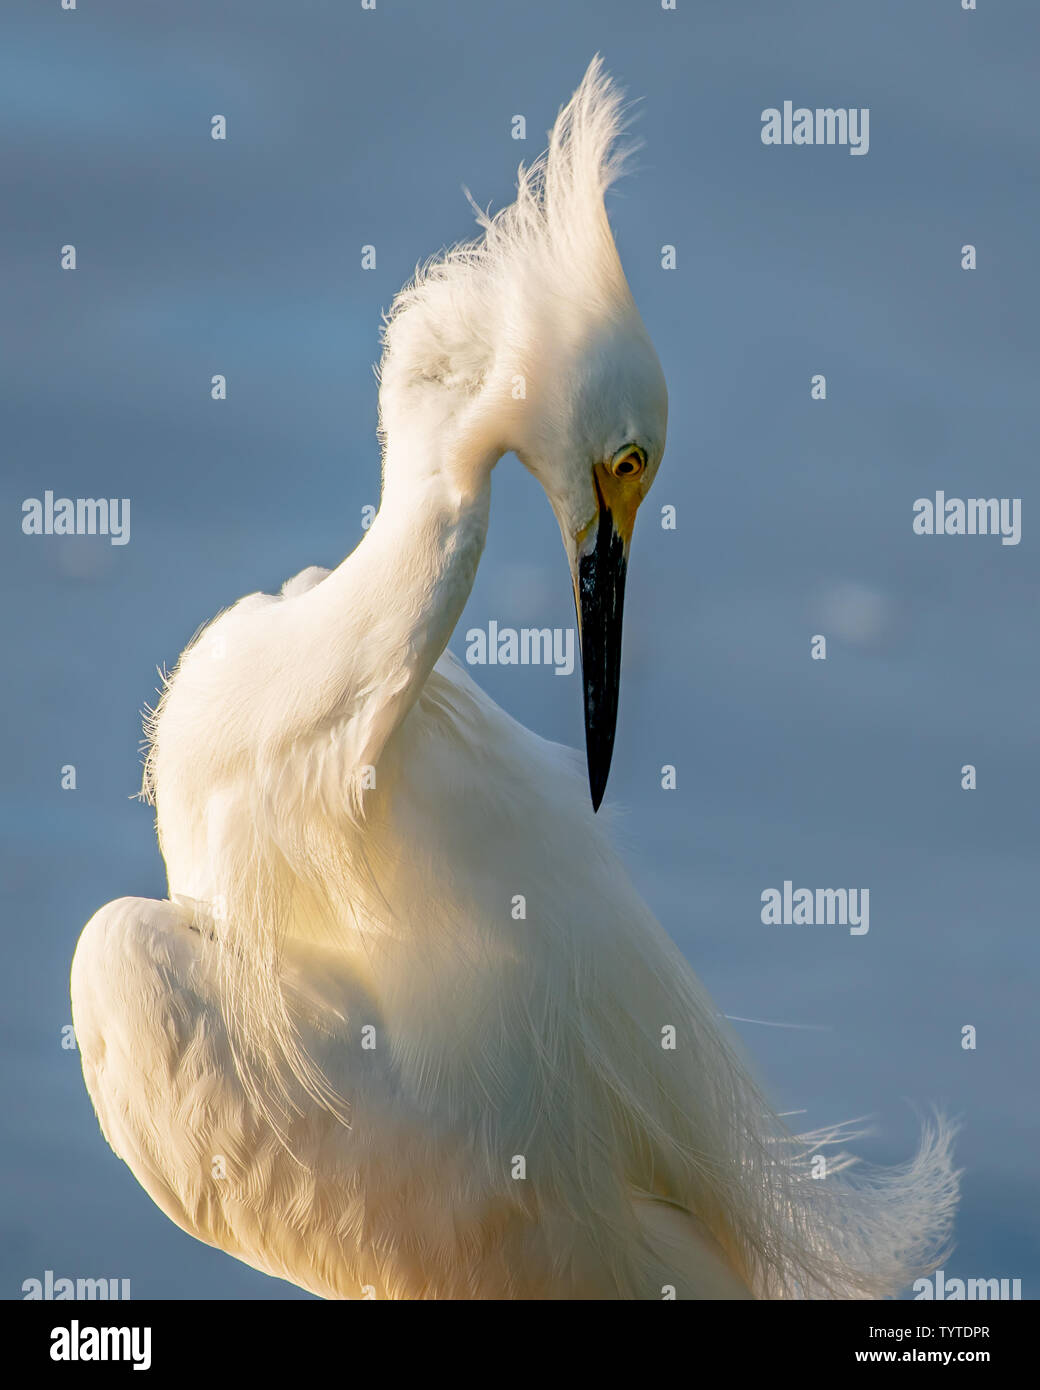 Snowy egret preening with spiked hair Stock Photo